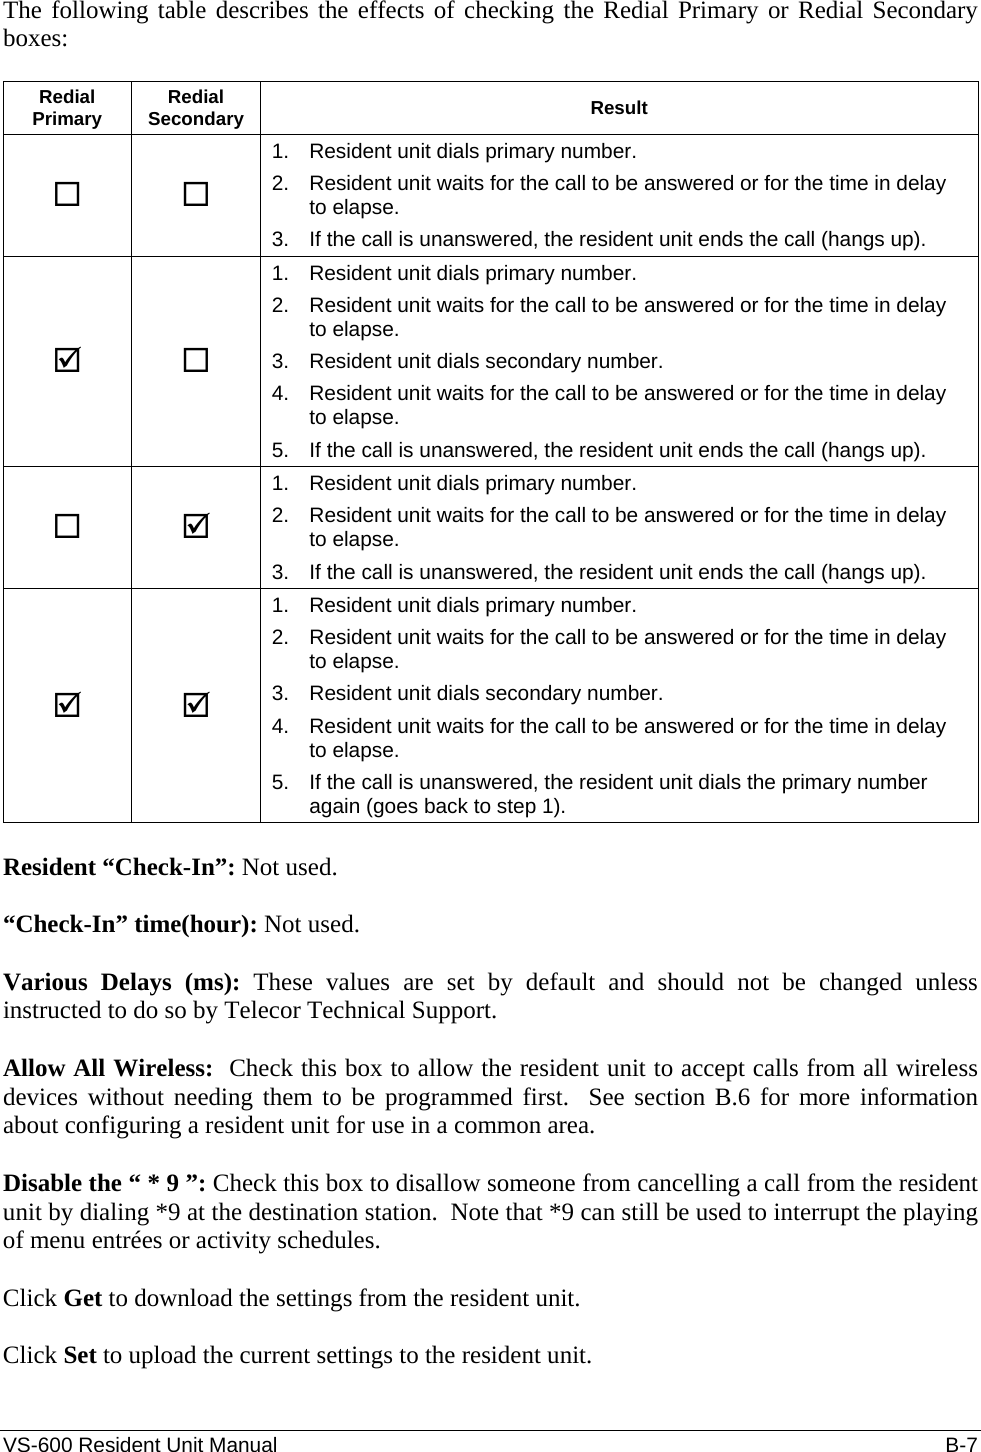 VS-600 Resident Unit Manual    B-7 The following table describes the effects of checking the Redial Primary or Redial Secondary boxes:  Redial Primary  Redial Secondary  Result   1.  Resident unit dials primary number. 2.  Resident unit waits for the call to be answered or for the time in delay to elapse. 3.  If the call is unanswered, the resident unit ends the call (hangs up). ;  1.  Resident unit dials primary number. 2.  Resident unit waits for the call to be answered or for the time in delay to elapse. 3.  Resident unit dials secondary number. 4.  Resident unit waits for the call to be answered or for the time in delay to elapse. 5.  If the call is unanswered, the resident unit ends the call (hangs up).  ; 1.  Resident unit dials primary number. 2.  Resident unit waits for the call to be answered or for the time in delay to elapse. 3.  If the call is unanswered, the resident unit ends the call (hangs up). ; ; 1.  Resident unit dials primary number. 2.  Resident unit waits for the call to be answered or for the time in delay to elapse. 3.  Resident unit dials secondary number. 4.  Resident unit waits for the call to be answered or for the time in delay to elapse. 5.  If the call is unanswered, the resident unit dials the primary number again (goes back to step 1).  Resident “Check-In”: Not used.  “Check-In” time(hour): Not used.  Various Delays (ms): These values are set by default and should not be changed unless instructed to do so by Telecor Technical Support.  Allow All Wireless:  Check this box to allow the resident unit to accept calls from all wireless devices without needing them to be programmed first.  See section B.6 for more information about configuring a resident unit for use in a common area.  Disable the “ * 9 ”: Check this box to disallow someone from cancelling a call from the resident unit by dialing *9 at the destination station.  Note that *9 can still be used to interrupt the playing of menu entrées or activity schedules.  Click Get to download the settings from the resident unit.  Click Set to upload the current settings to the resident unit.  